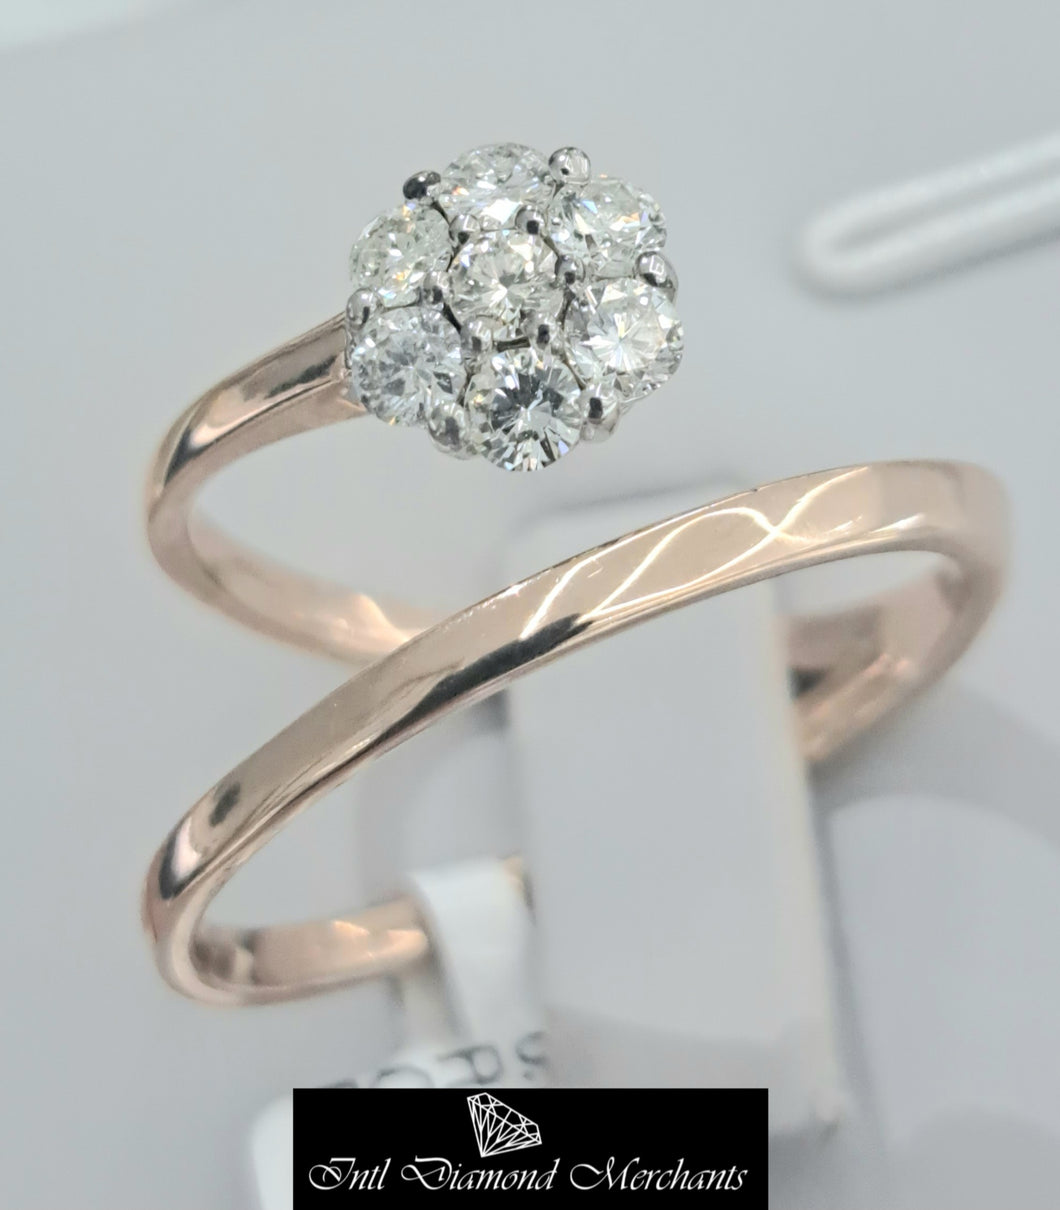 0.35cts [7] Round Brilliant Cut Diamonds | Cluster Diamond Ring | 18kt Rose and White Gold